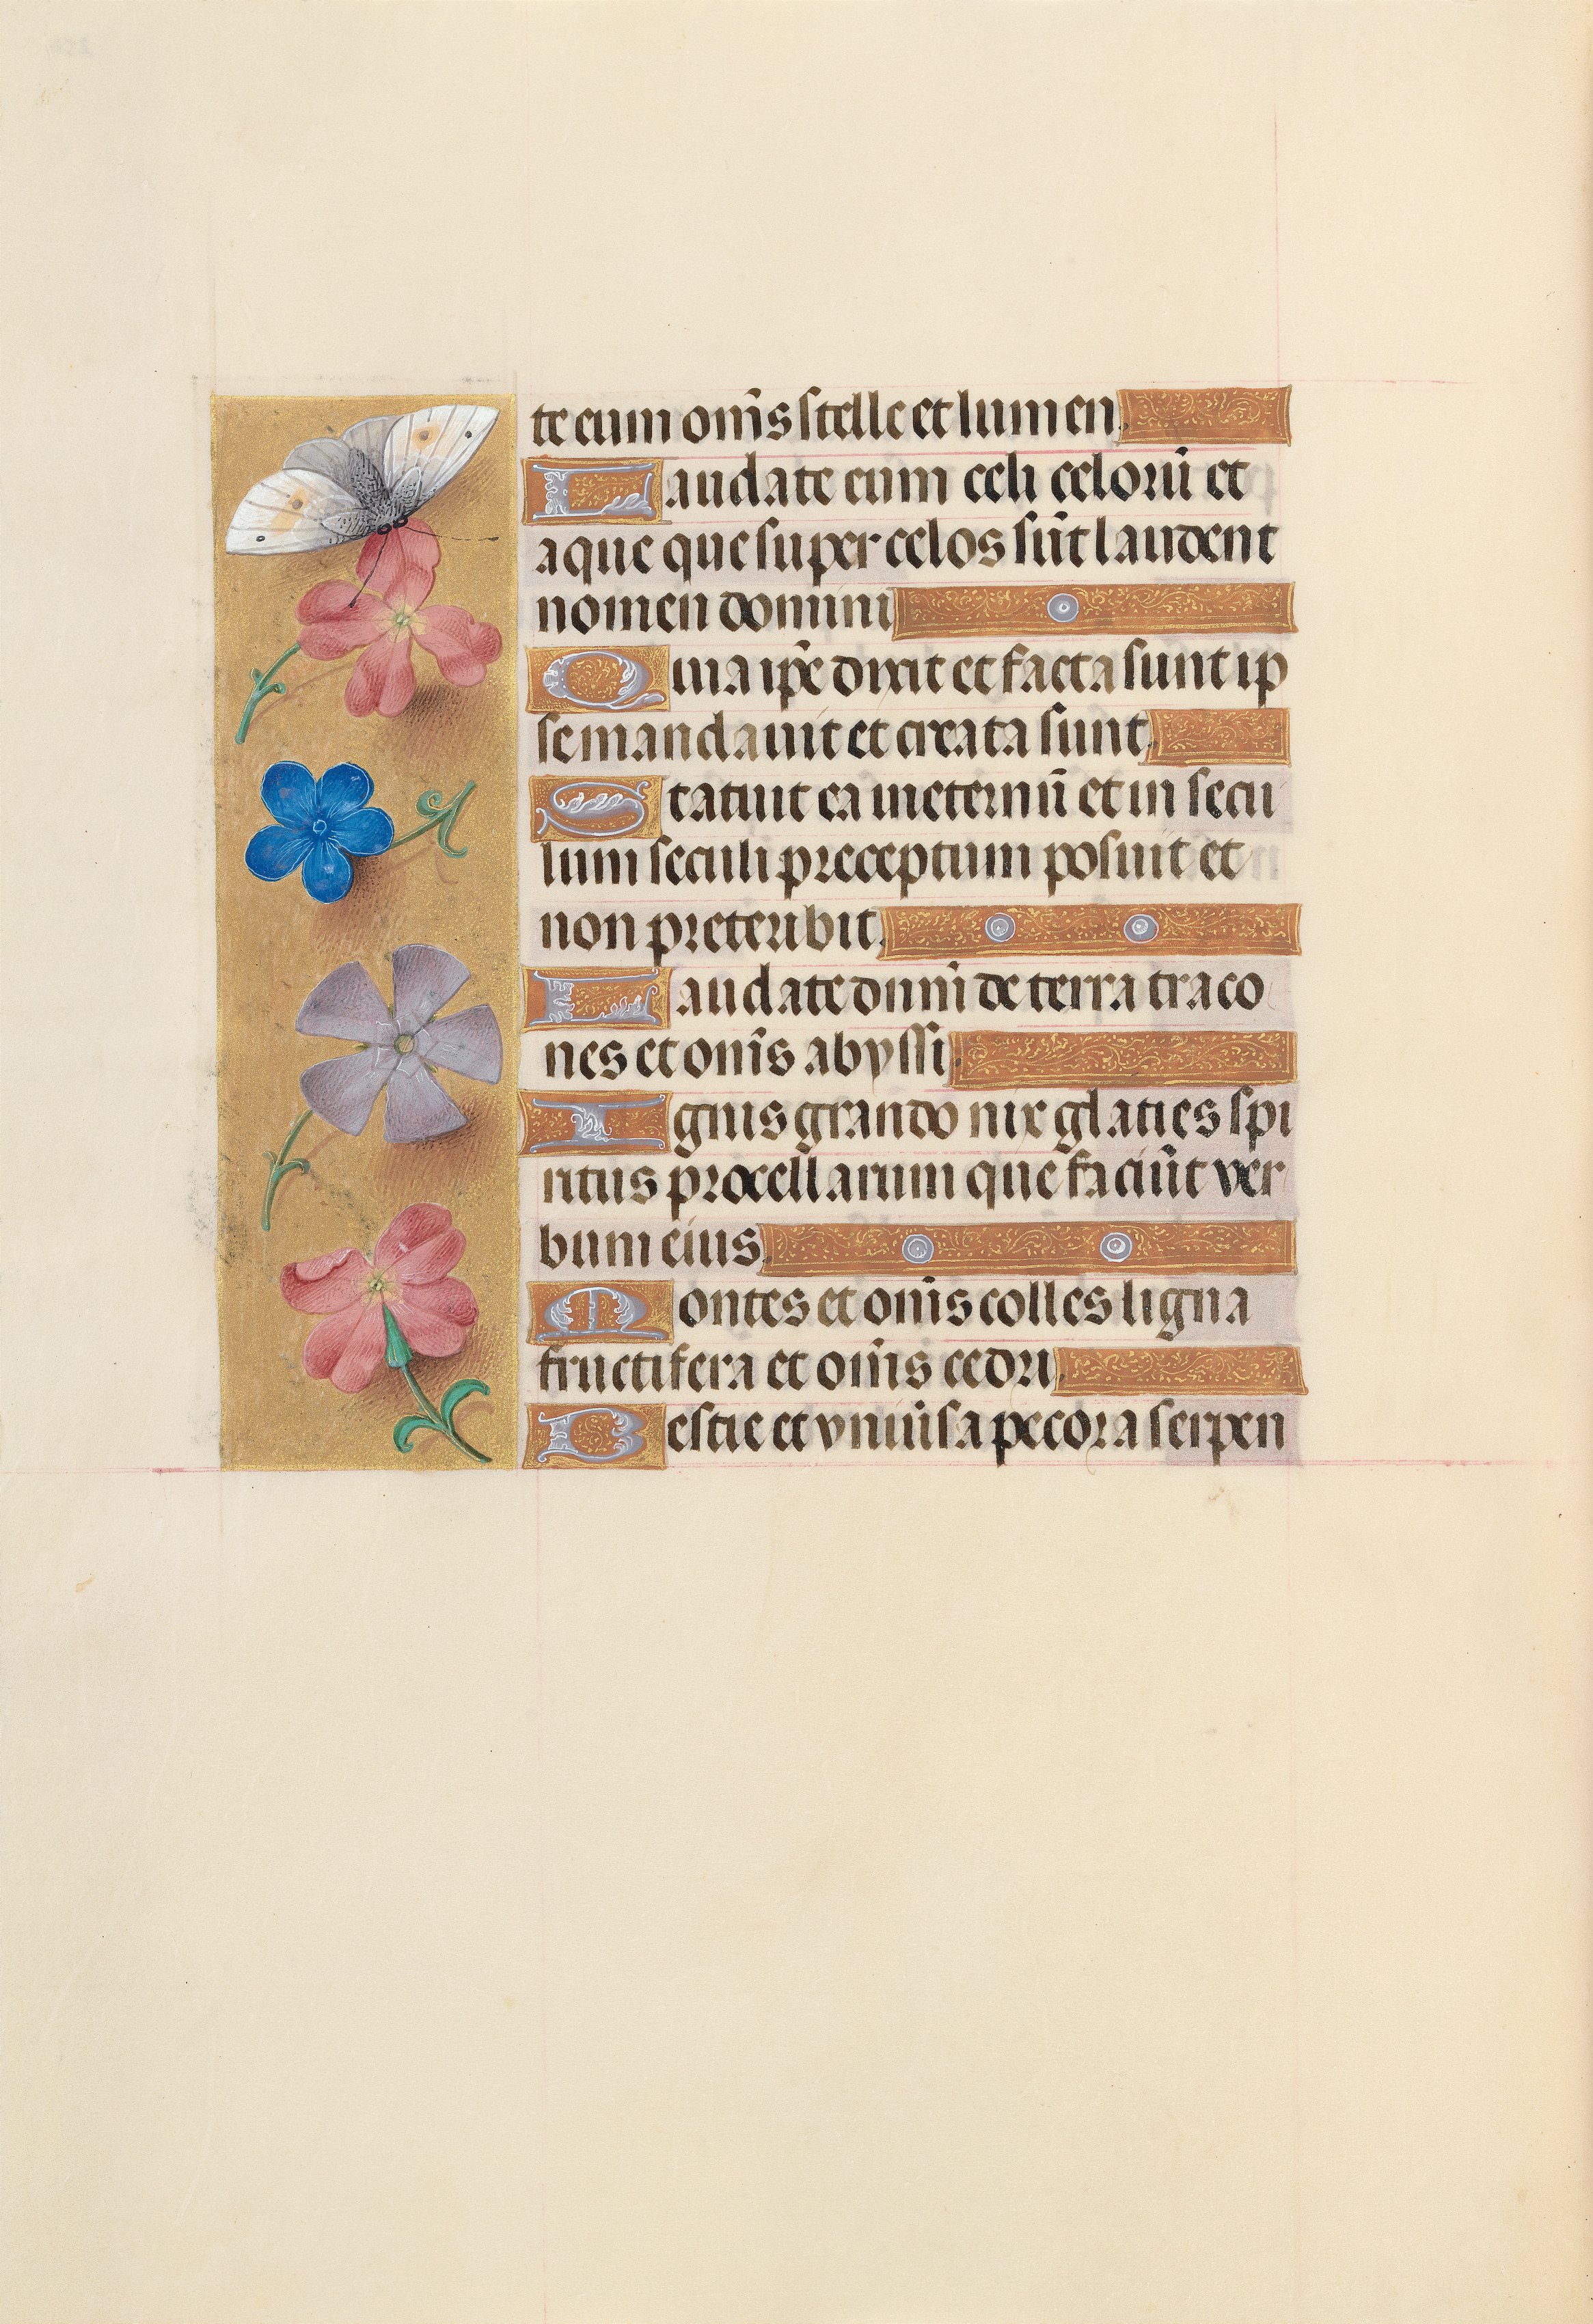 Hours of Queen Isabella the Catholic, Queen of Spain:  Fol. 252v